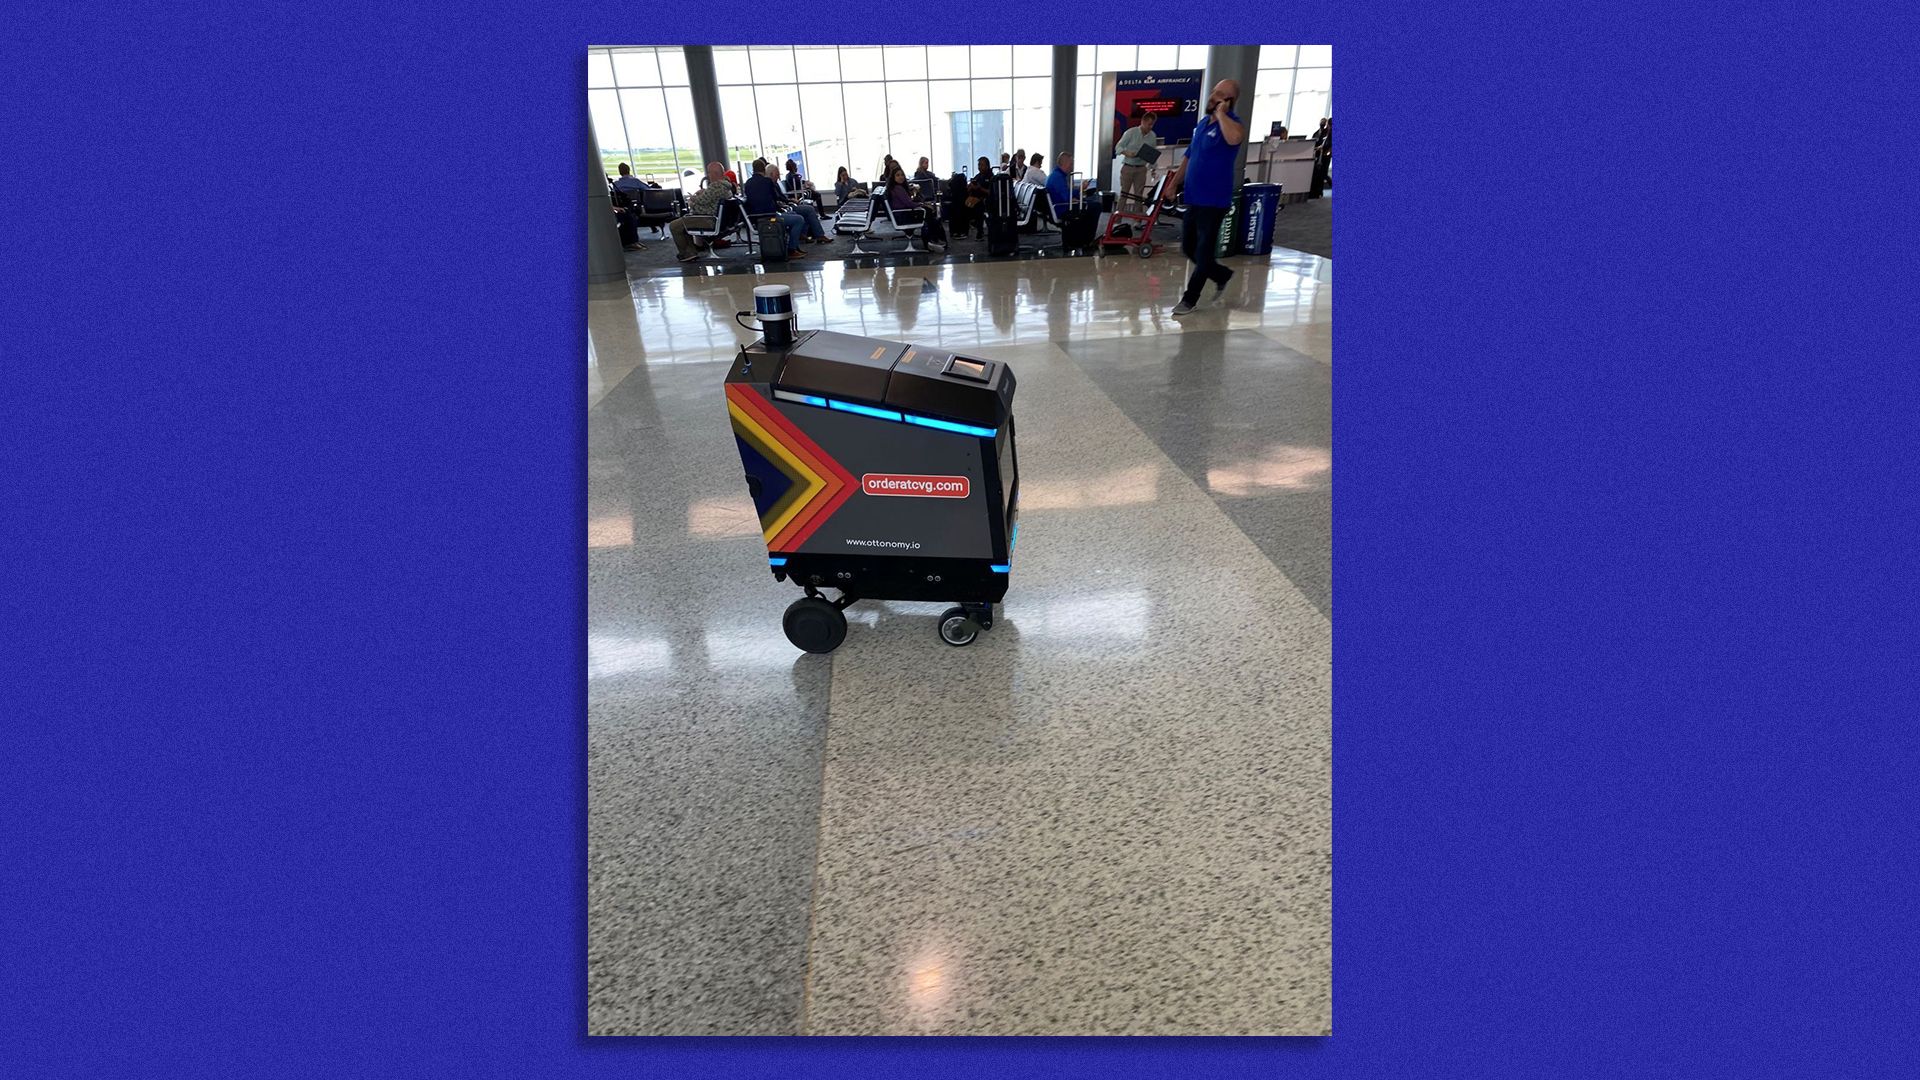 An Ottobot delivery robot in the Cincinnati airport